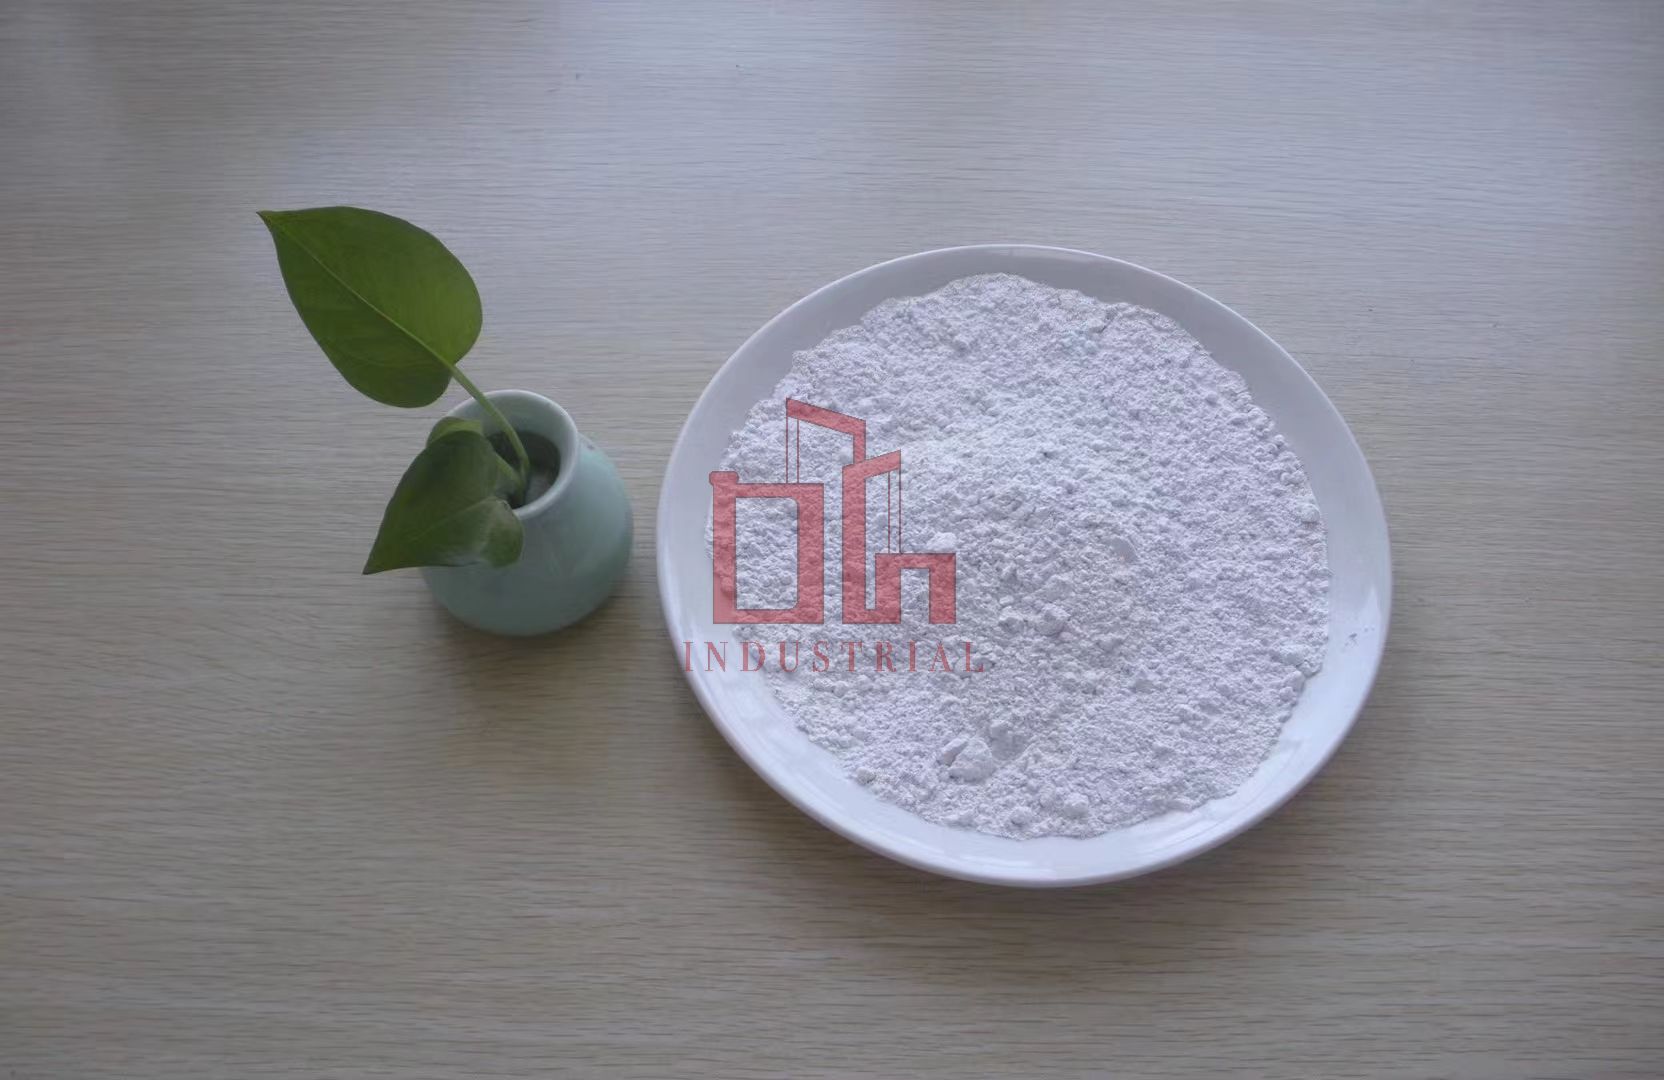 How to choose suitable alumina powder and dispersant for high-aluminum castables?